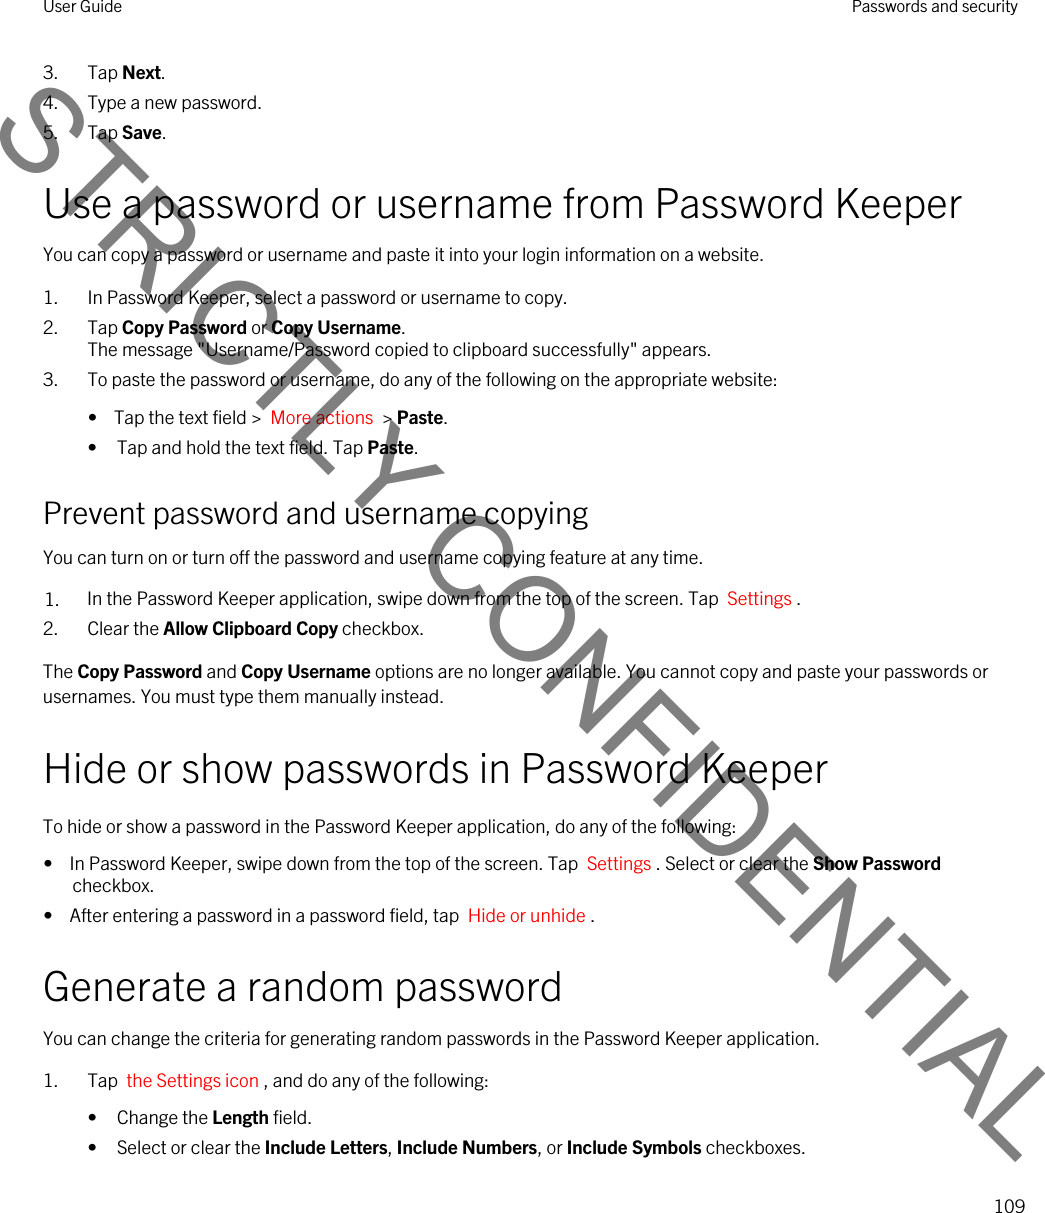 3. Tap Next.4. Type a new password.5. Tap Save.Use a password or username from Password KeeperYou can copy a password or username and paste it into your login information on a website.1. In Password Keeper, select a password or username to copy.2. Tap Copy Password or Copy Username.The message &quot;Username/Password copied to clipboard successfully&quot; appears.3. To paste the password or username, do any of the following on the appropriate website:•  Tap the text field &gt;  More actions  &gt; Paste.• Tap and hold the text field. Tap Paste.Prevent password and username copyingYou can turn on or turn off the password and username copying feature at any time.1. In the Password Keeper application, swipe down from the top of the screen. Tap  Settings .2. Clear the Allow Clipboard Copy checkbox.The Copy Password and Copy Username options are no longer available. You cannot copy and paste your passwords or usernames. You must type them manually instead.Hide or show passwords in Password KeeperTo hide or show a password in the Password Keeper application, do any of the following:•  In Password Keeper, swipe down from the top of the screen. Tap  Settings . Select or clear the Show Password checkbox.•  After entering a password in a password field, tap  Hide or unhide .Generate a random passwordYou can change the criteria for generating random passwords in the Password Keeper application.1. Tap  the Settings icon , and do any of the following:• Change the Length field.• Select or clear the Include Letters, Include Numbers, or Include Symbols checkboxes.User Guide Passwords and security109STRICTLY CONFIDENTIAL